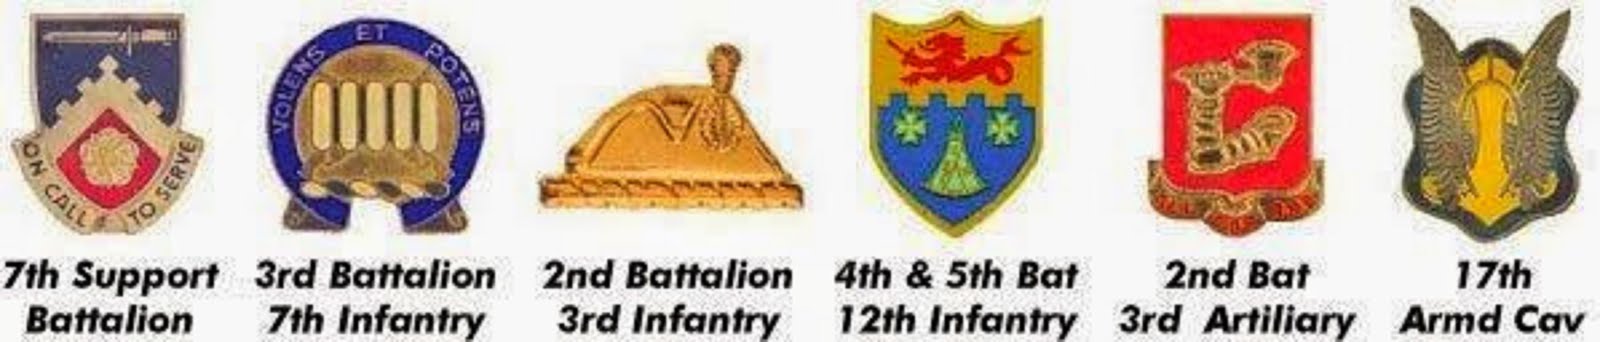 199th LIGHT INFANTRY BRIGADE SUPPORT BATTALIONS